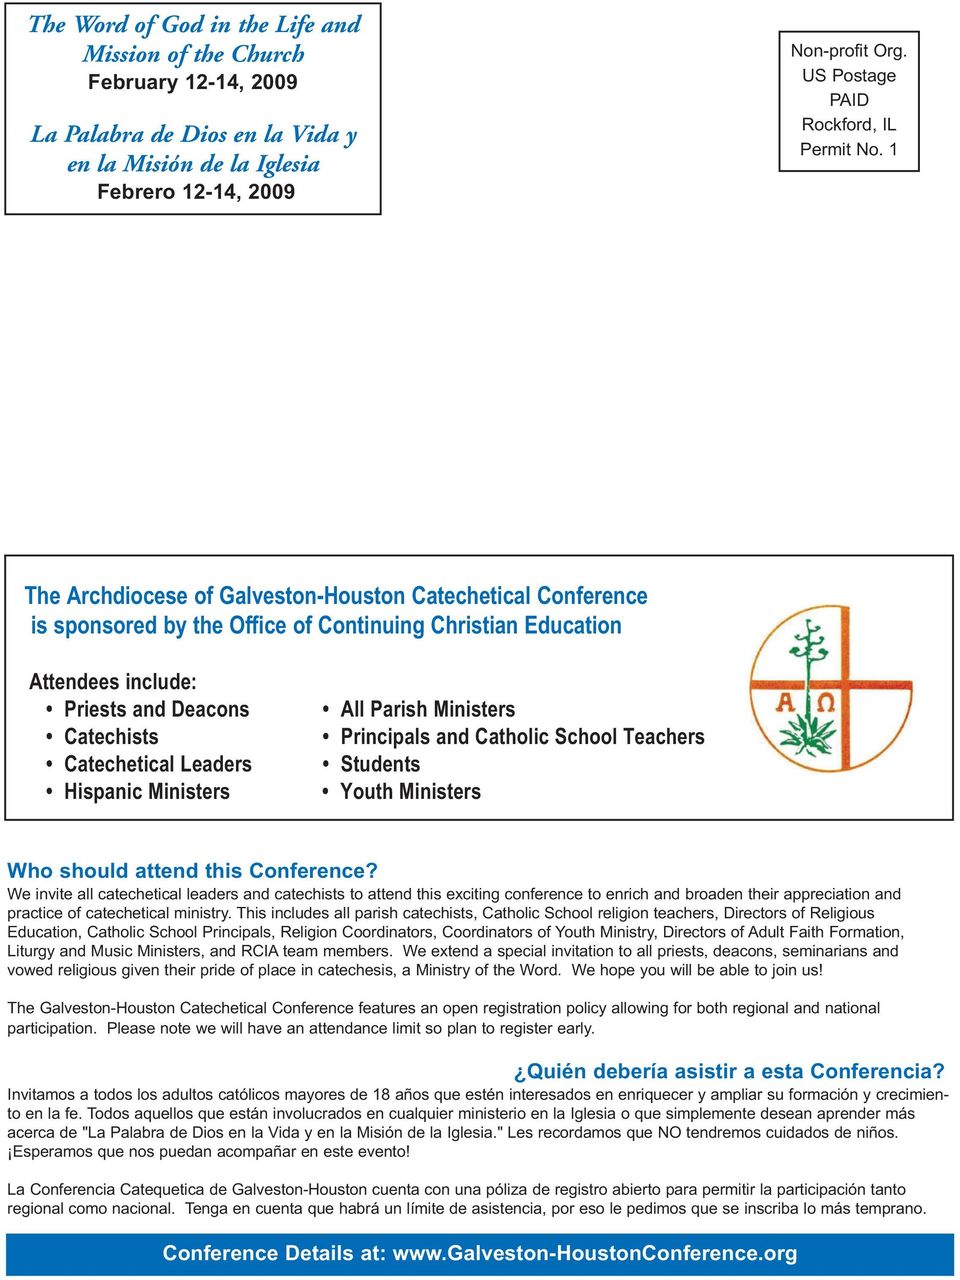 1 The Archdiocese of Galveston-Houston Catechetical Conference is sponsored by the Office of Continuing Christian Education Attendees include: Priests and Deacons Catechists Catechetical Leaders